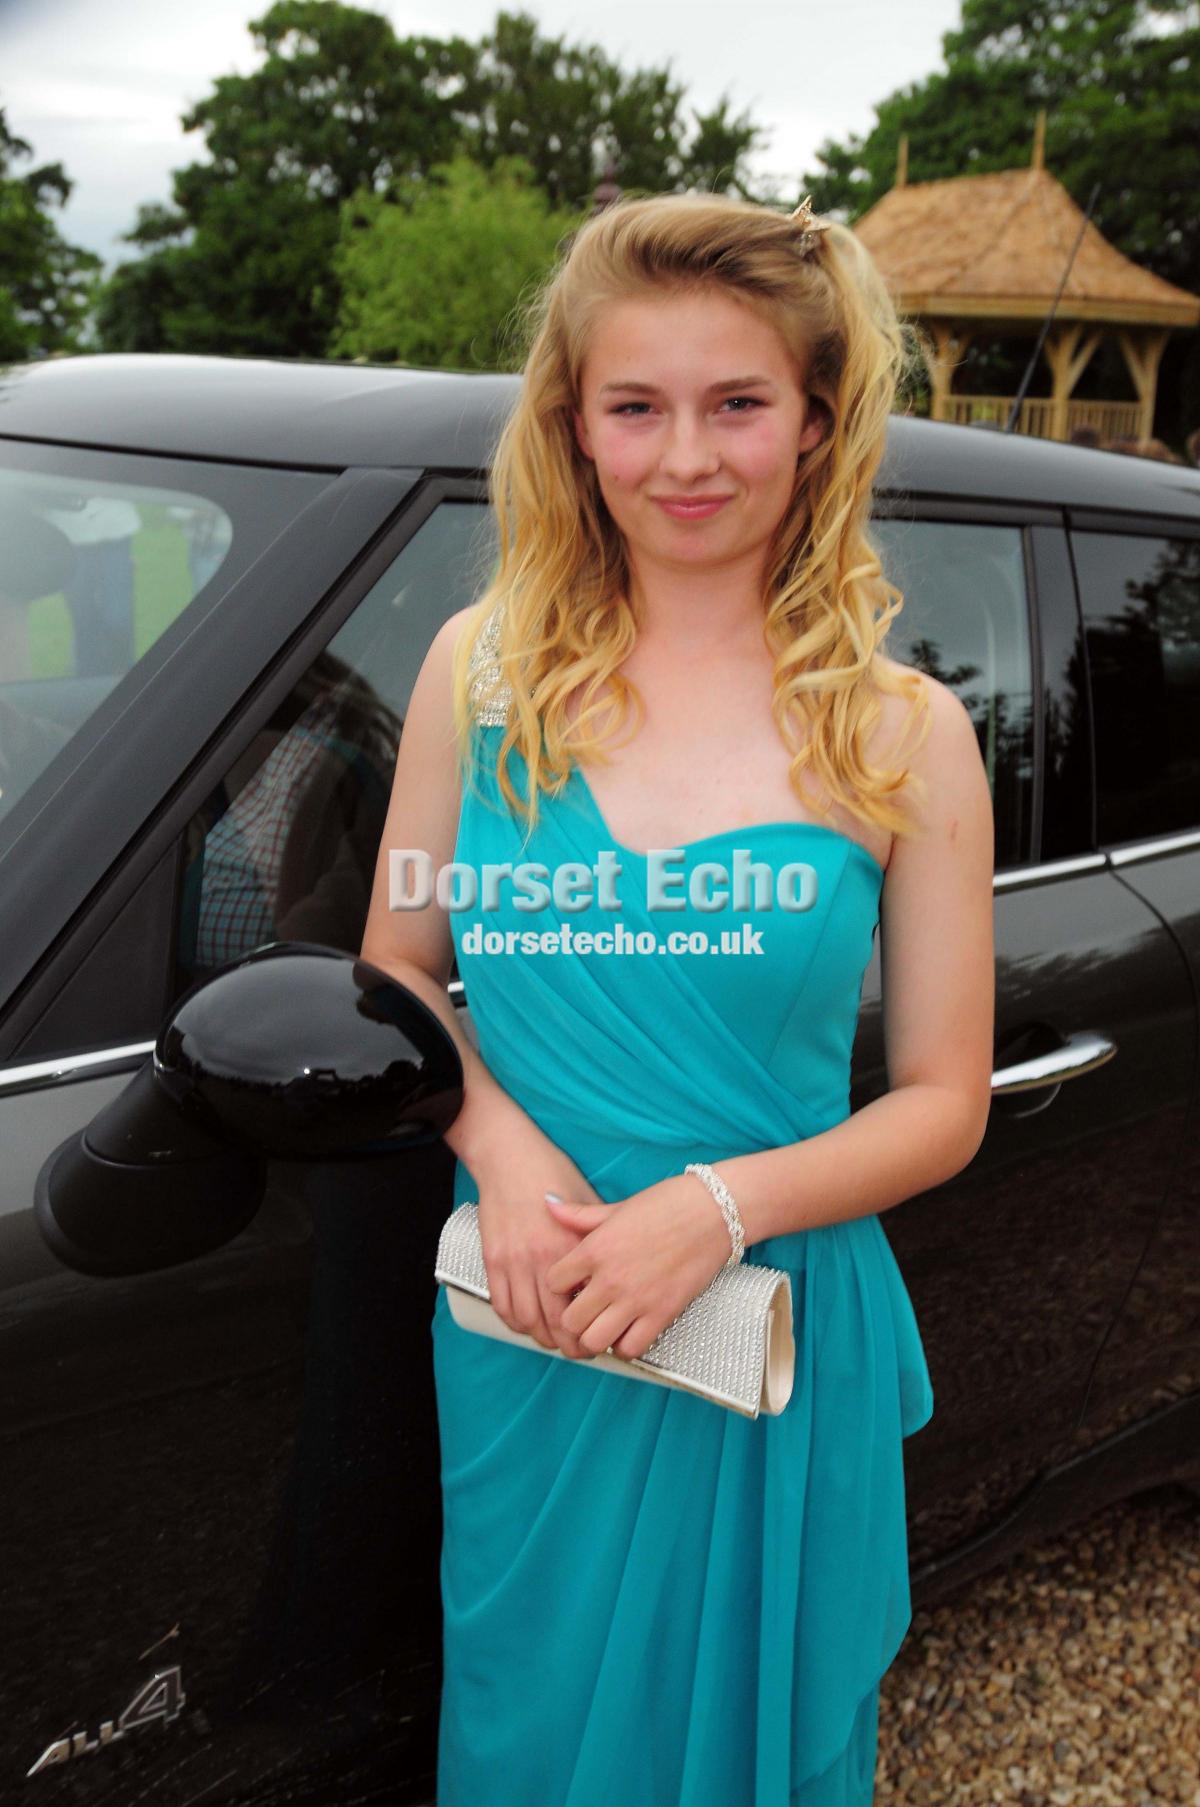 Beaminster pupils celebrated in style at their prom